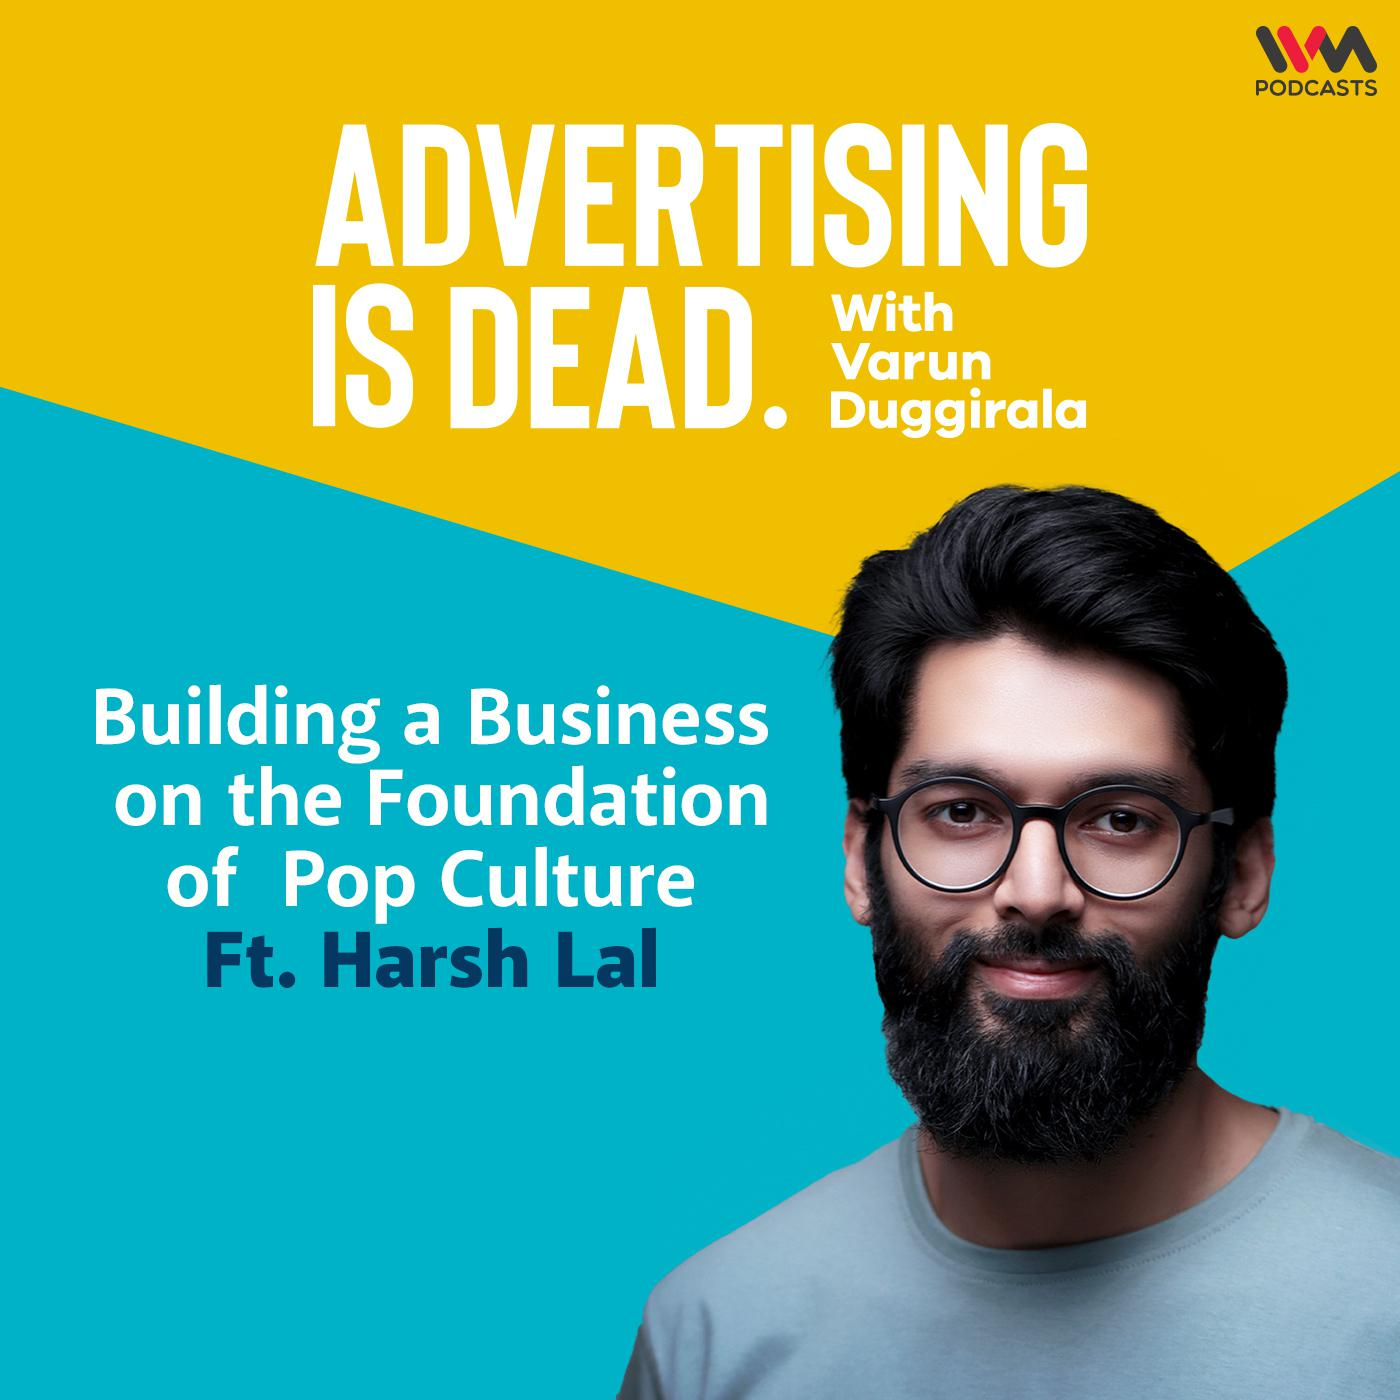 Harsh Lal on Building a Business on the Foundation of Pop Culture